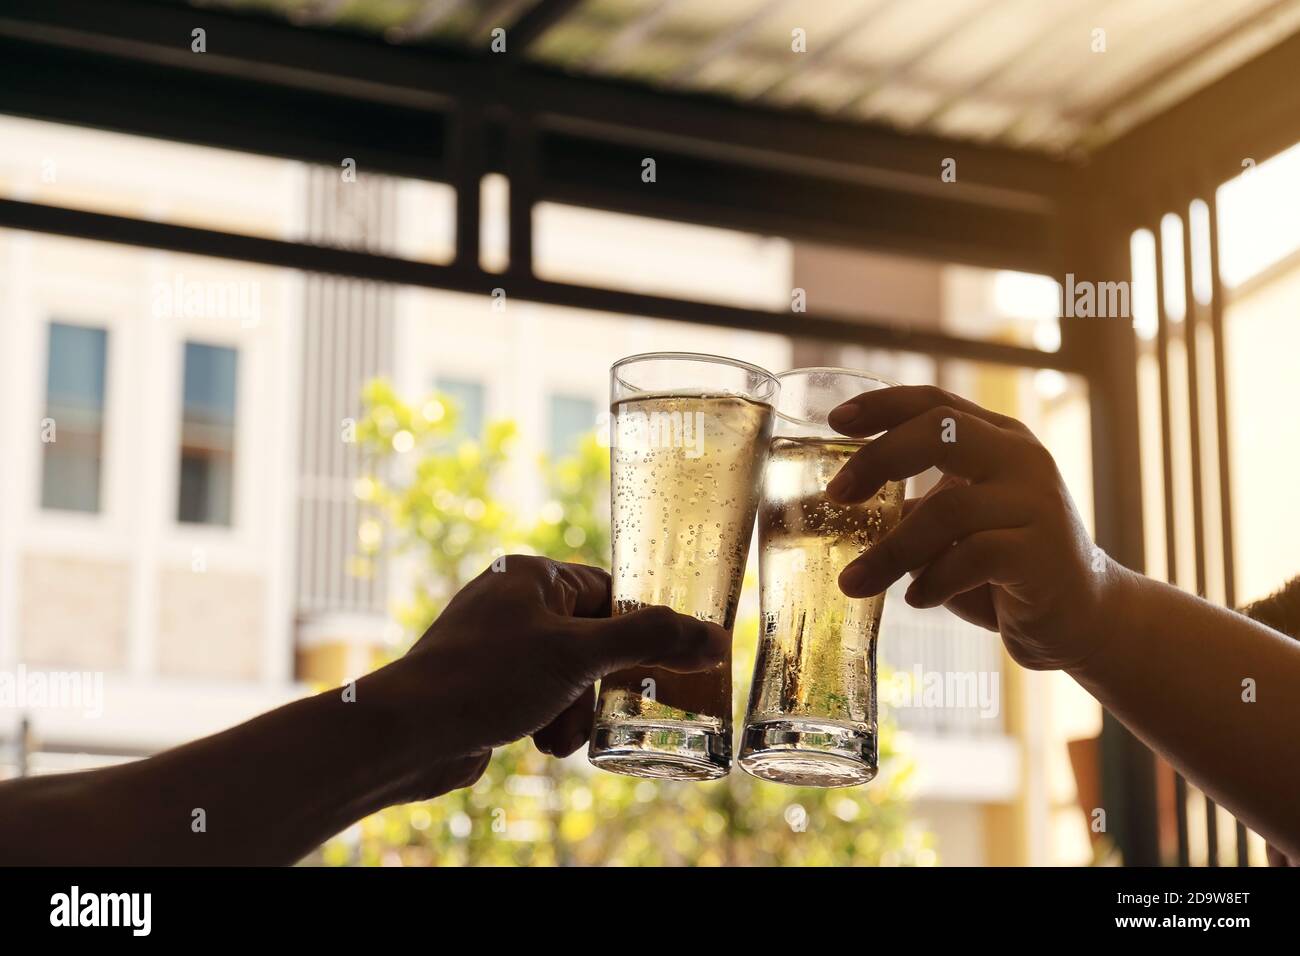 The hands of two men holding a glass of beer raised together to drink to celebrate the success. Stock Photo